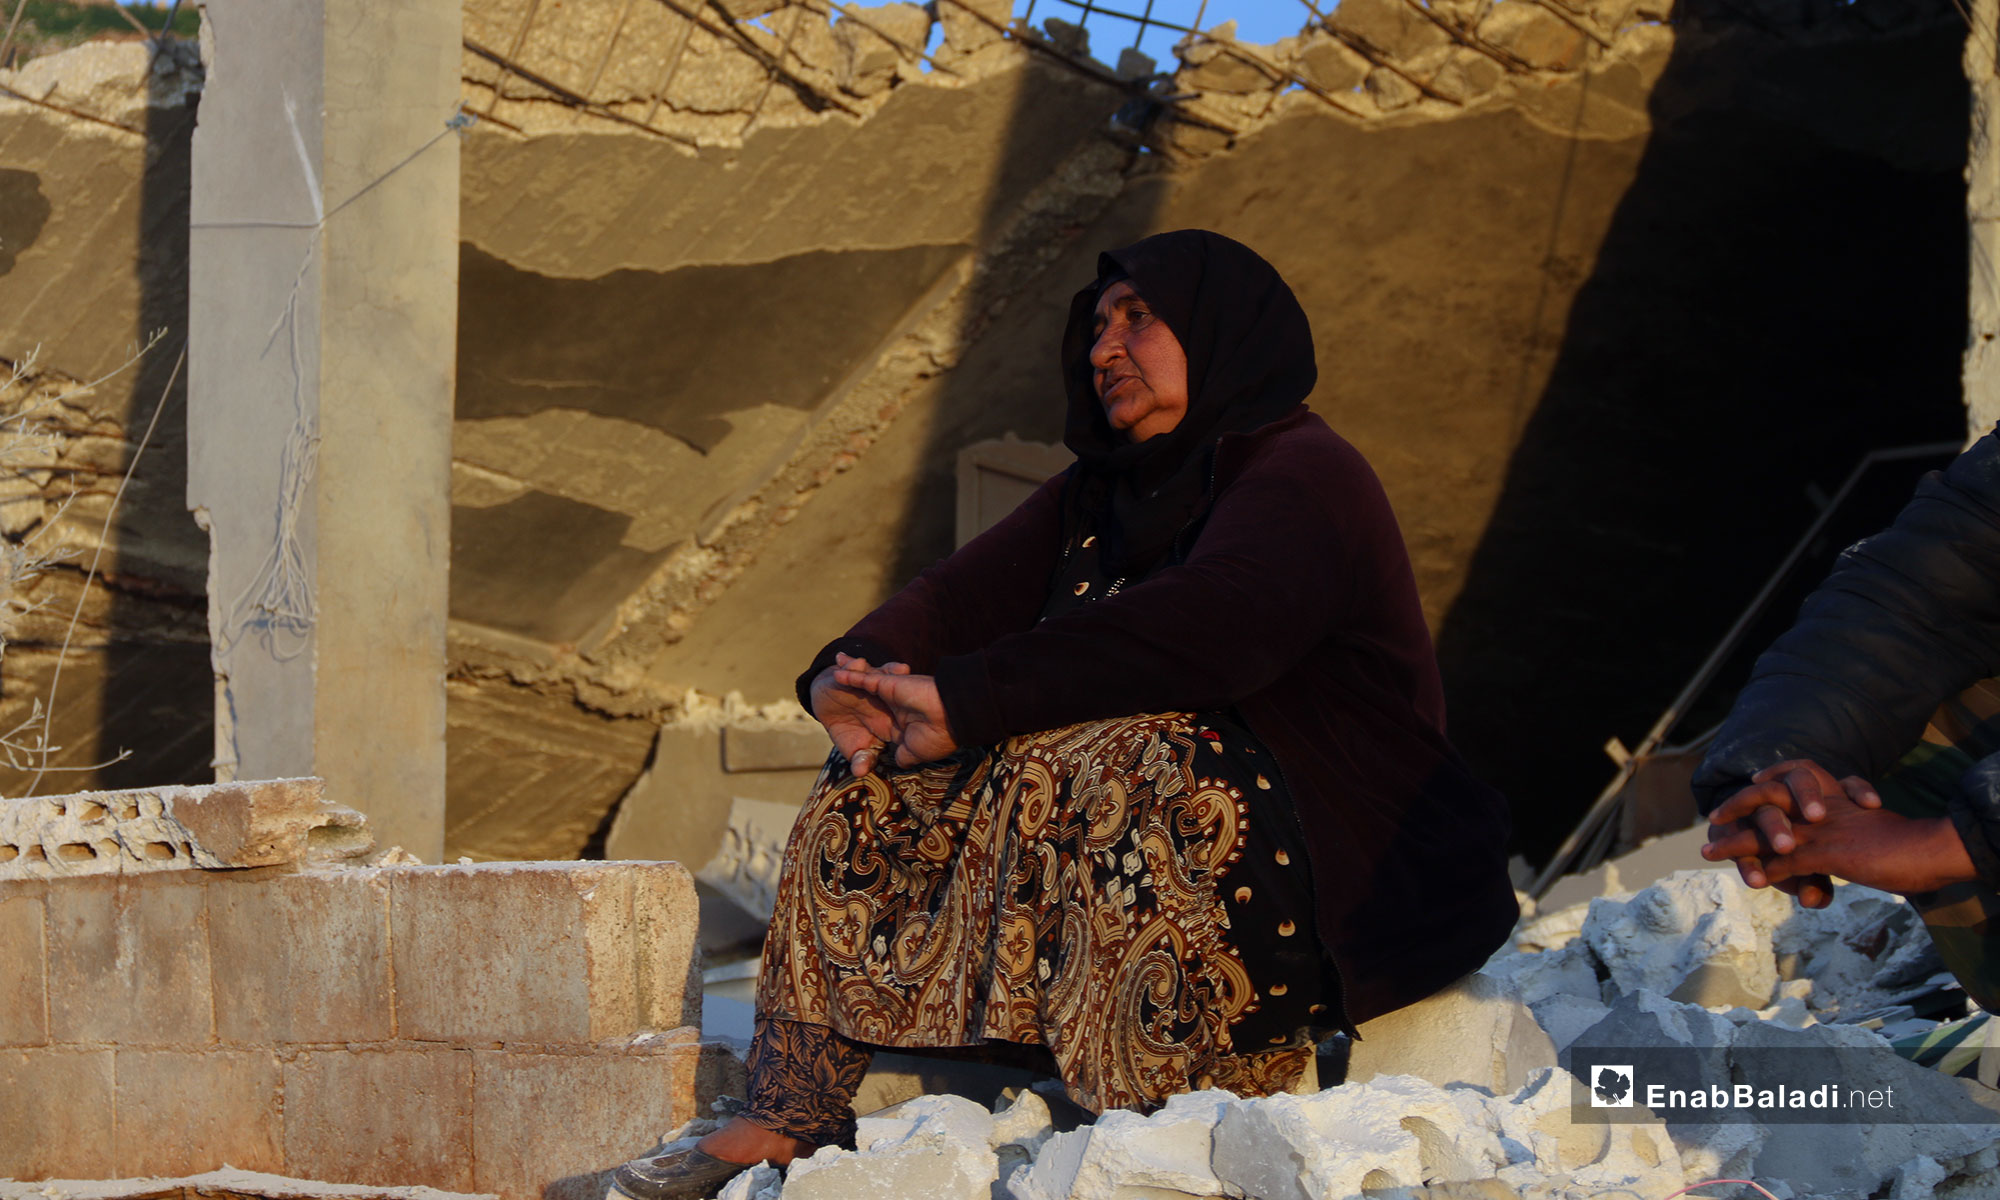 A woman sitting on the rubble of her house after it was shelled by the Russian aircraft in the town of Faqie, southern Idlib – March 21, 2019 (Enab Baladi)